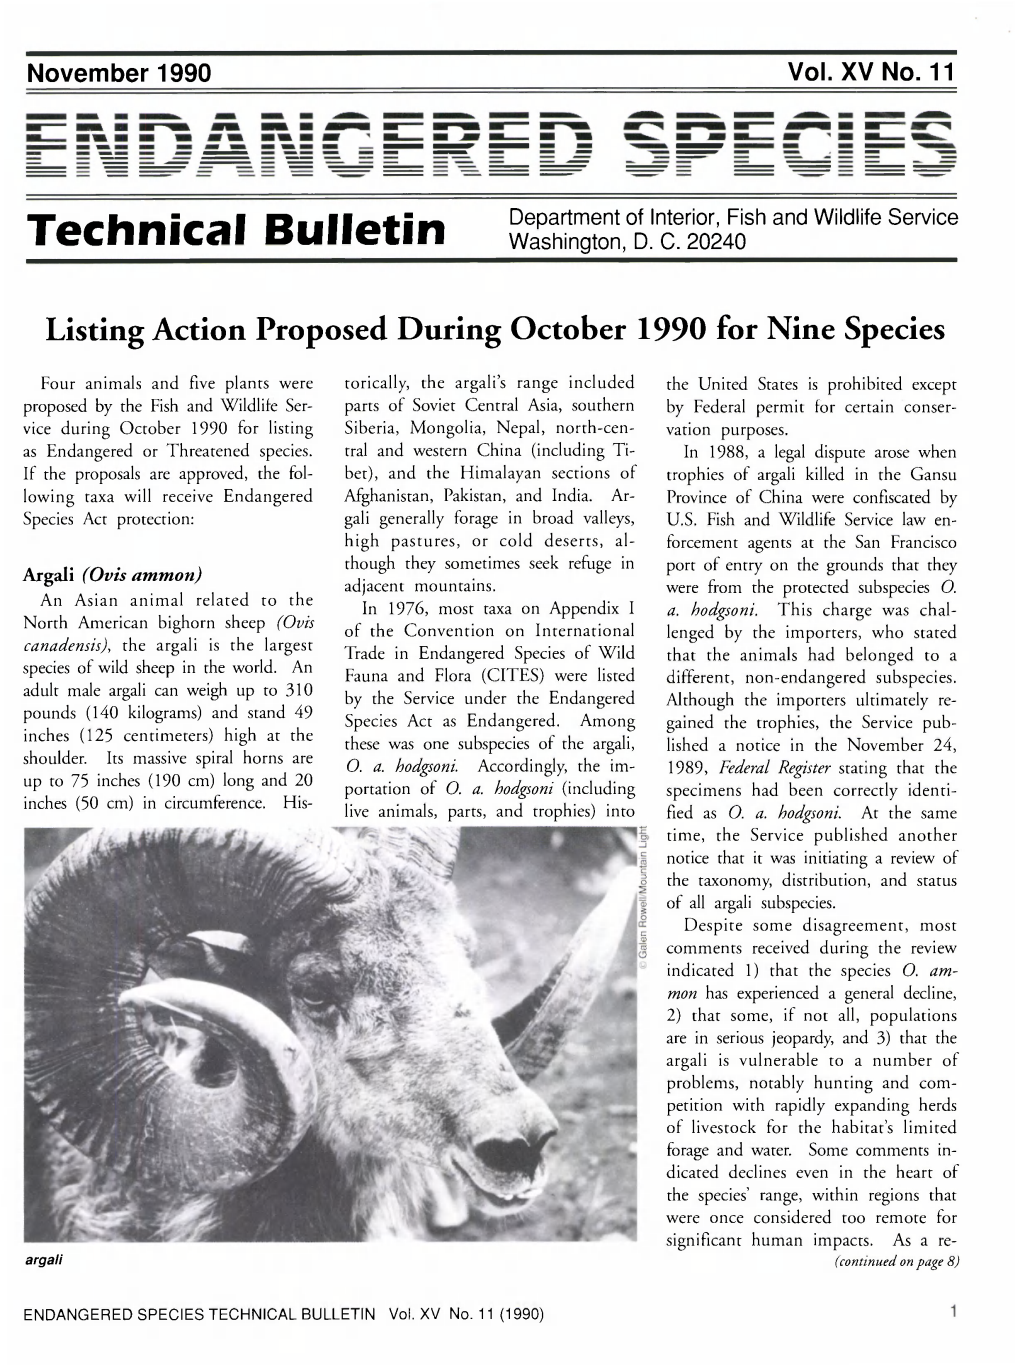 Listing Action Proposed During October 1990 for Nine Species